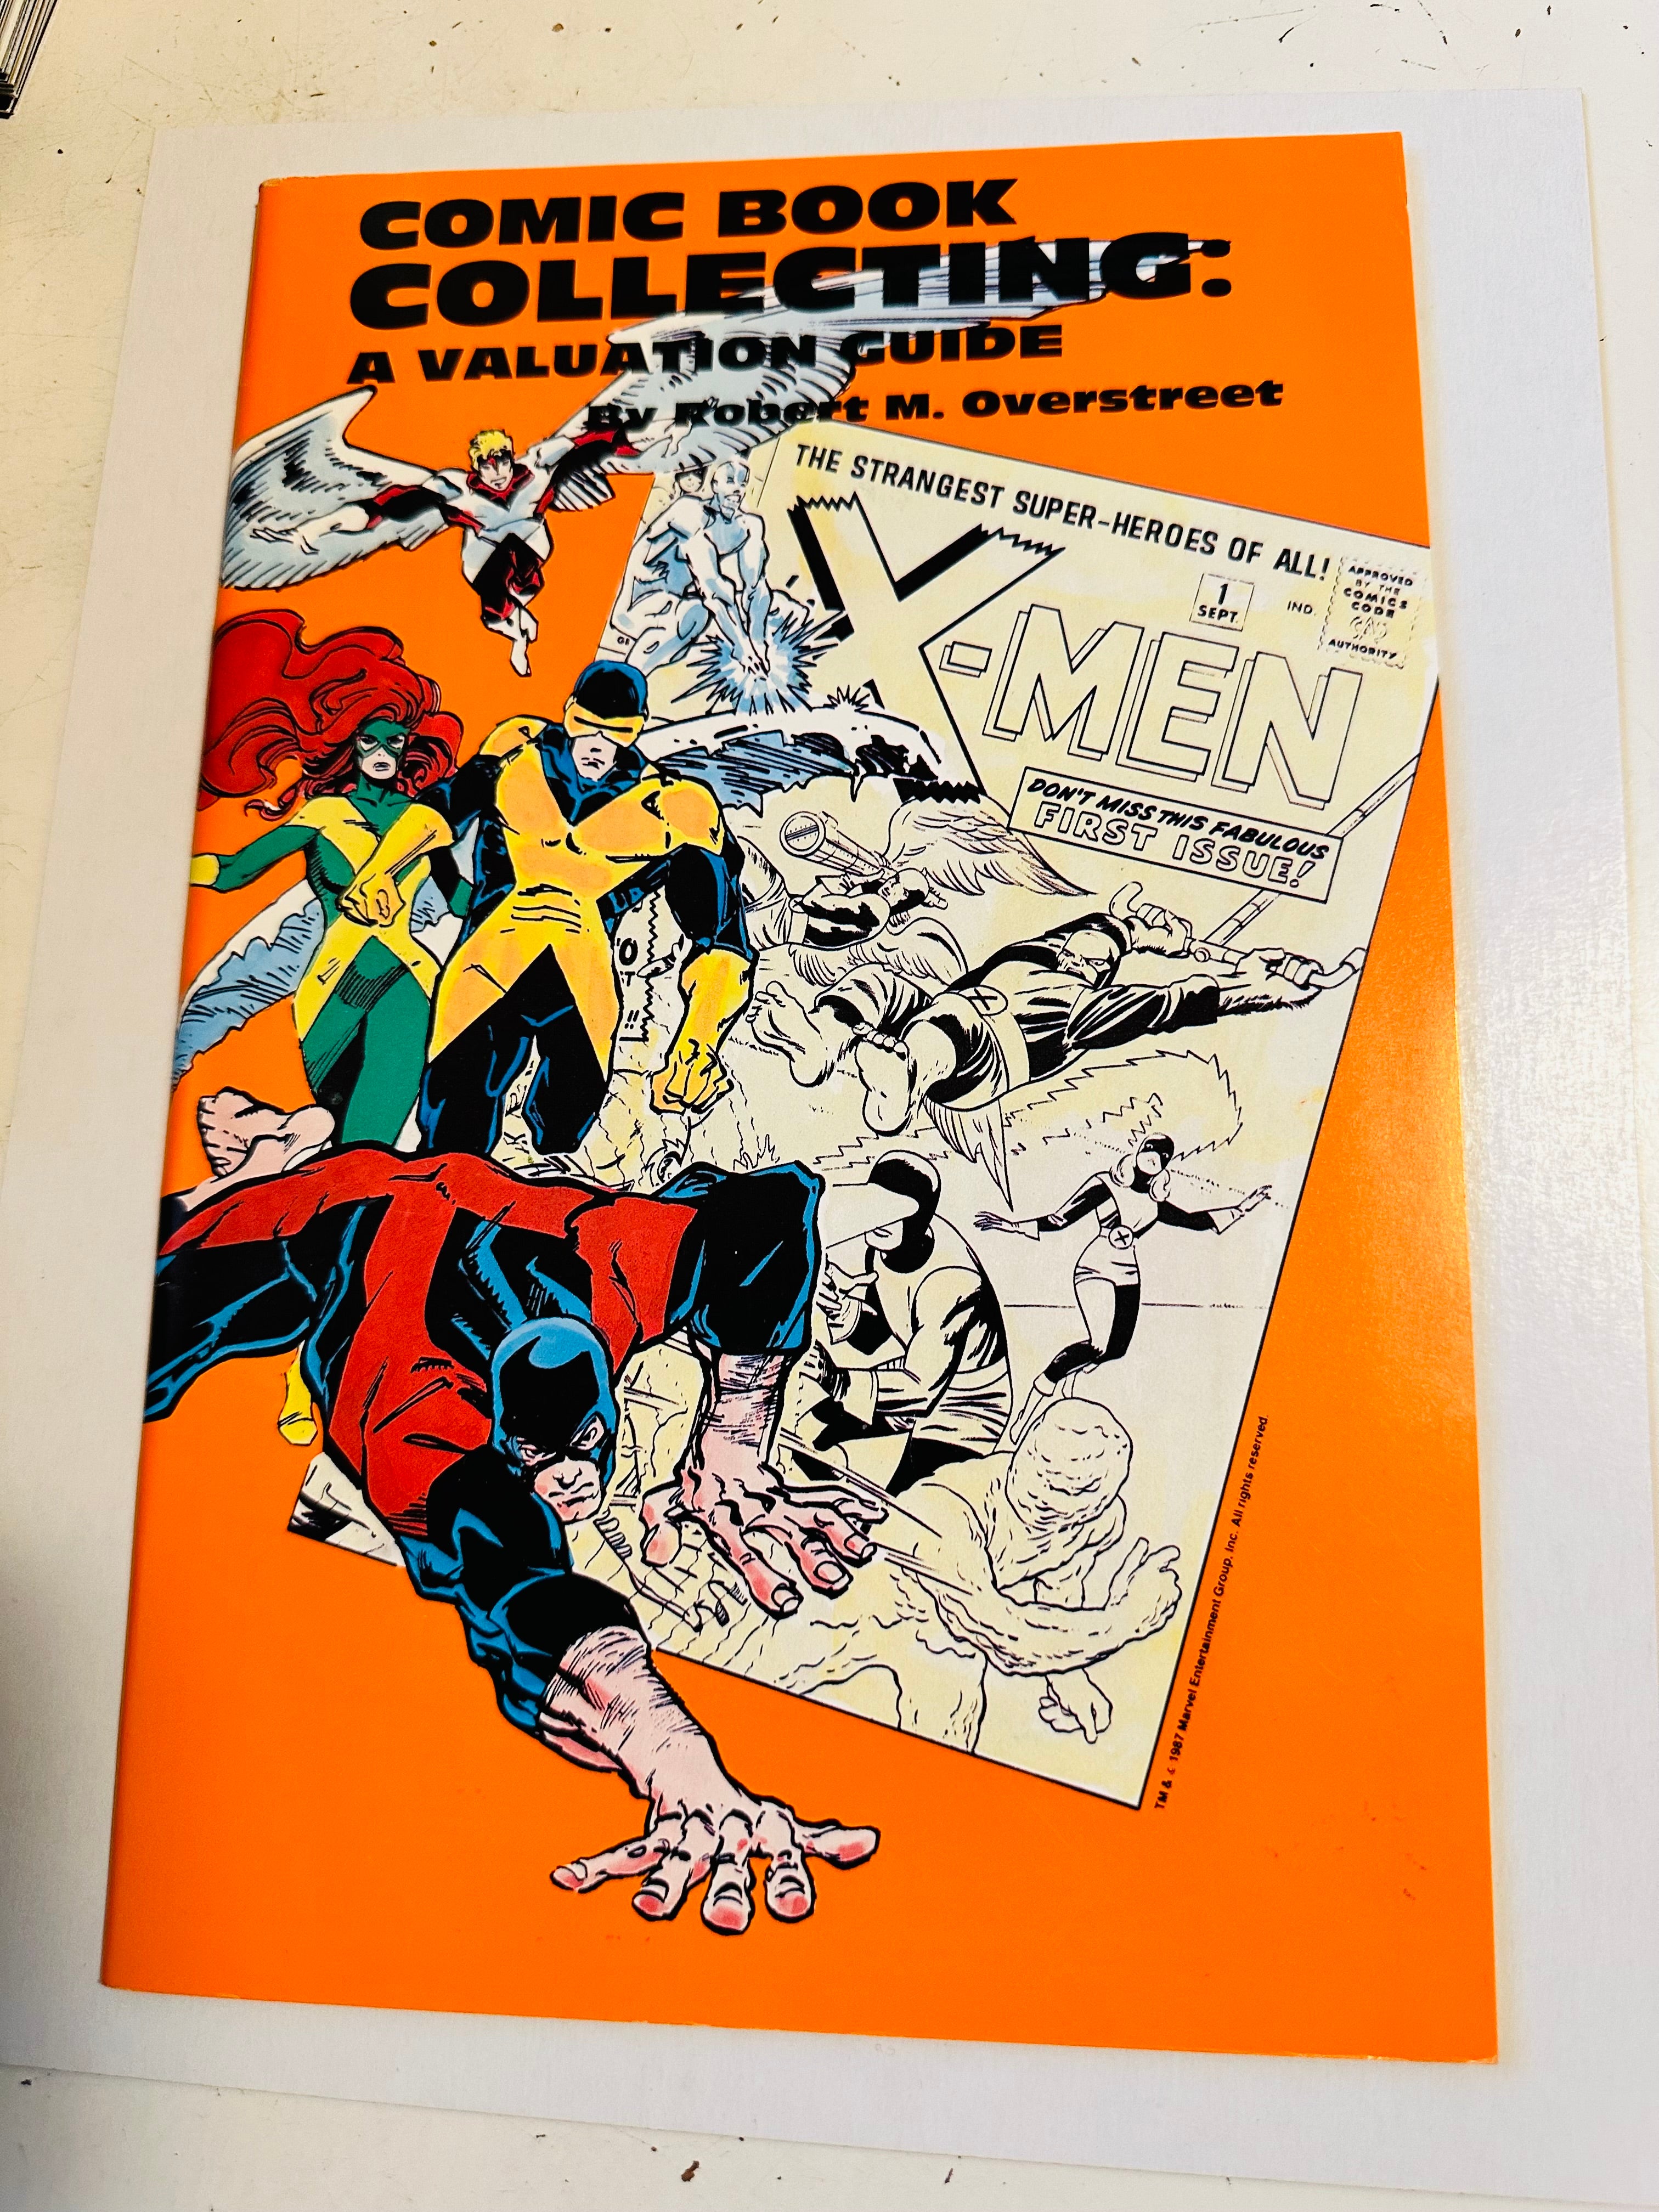 Comic book collecting evaluation guide, Overstreet 1987